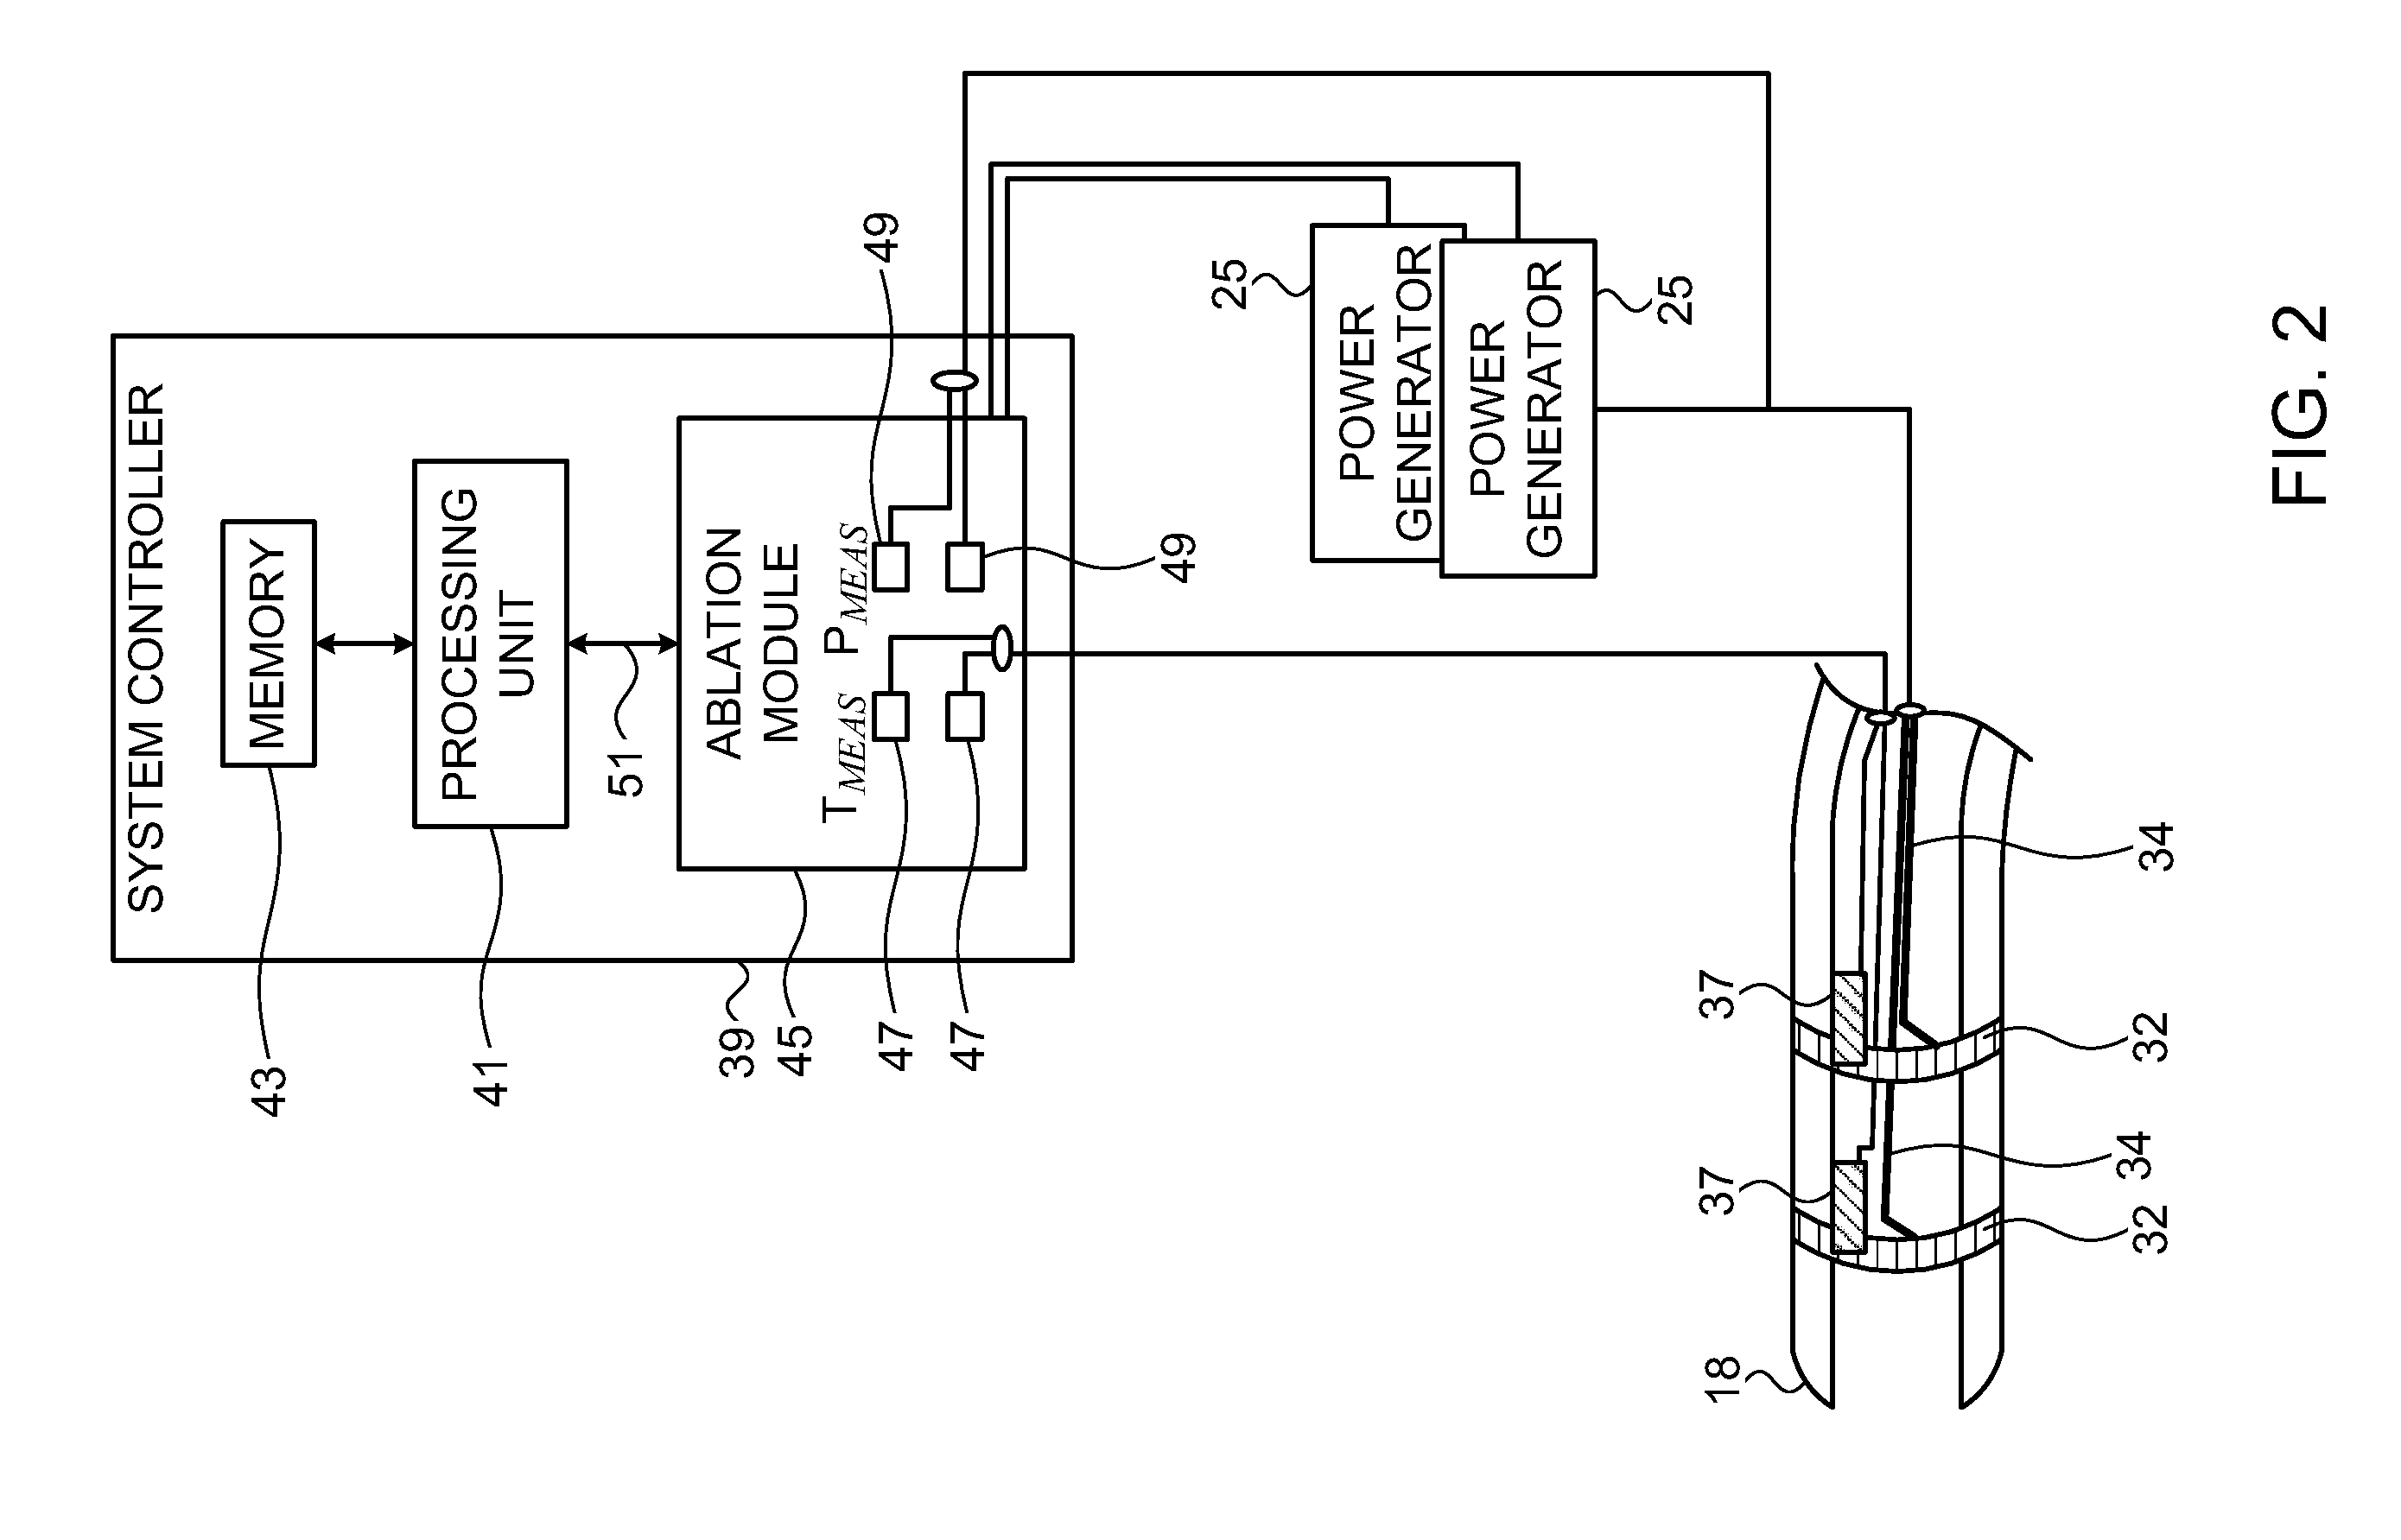 System for controlling tissue ablation using temperature sensors